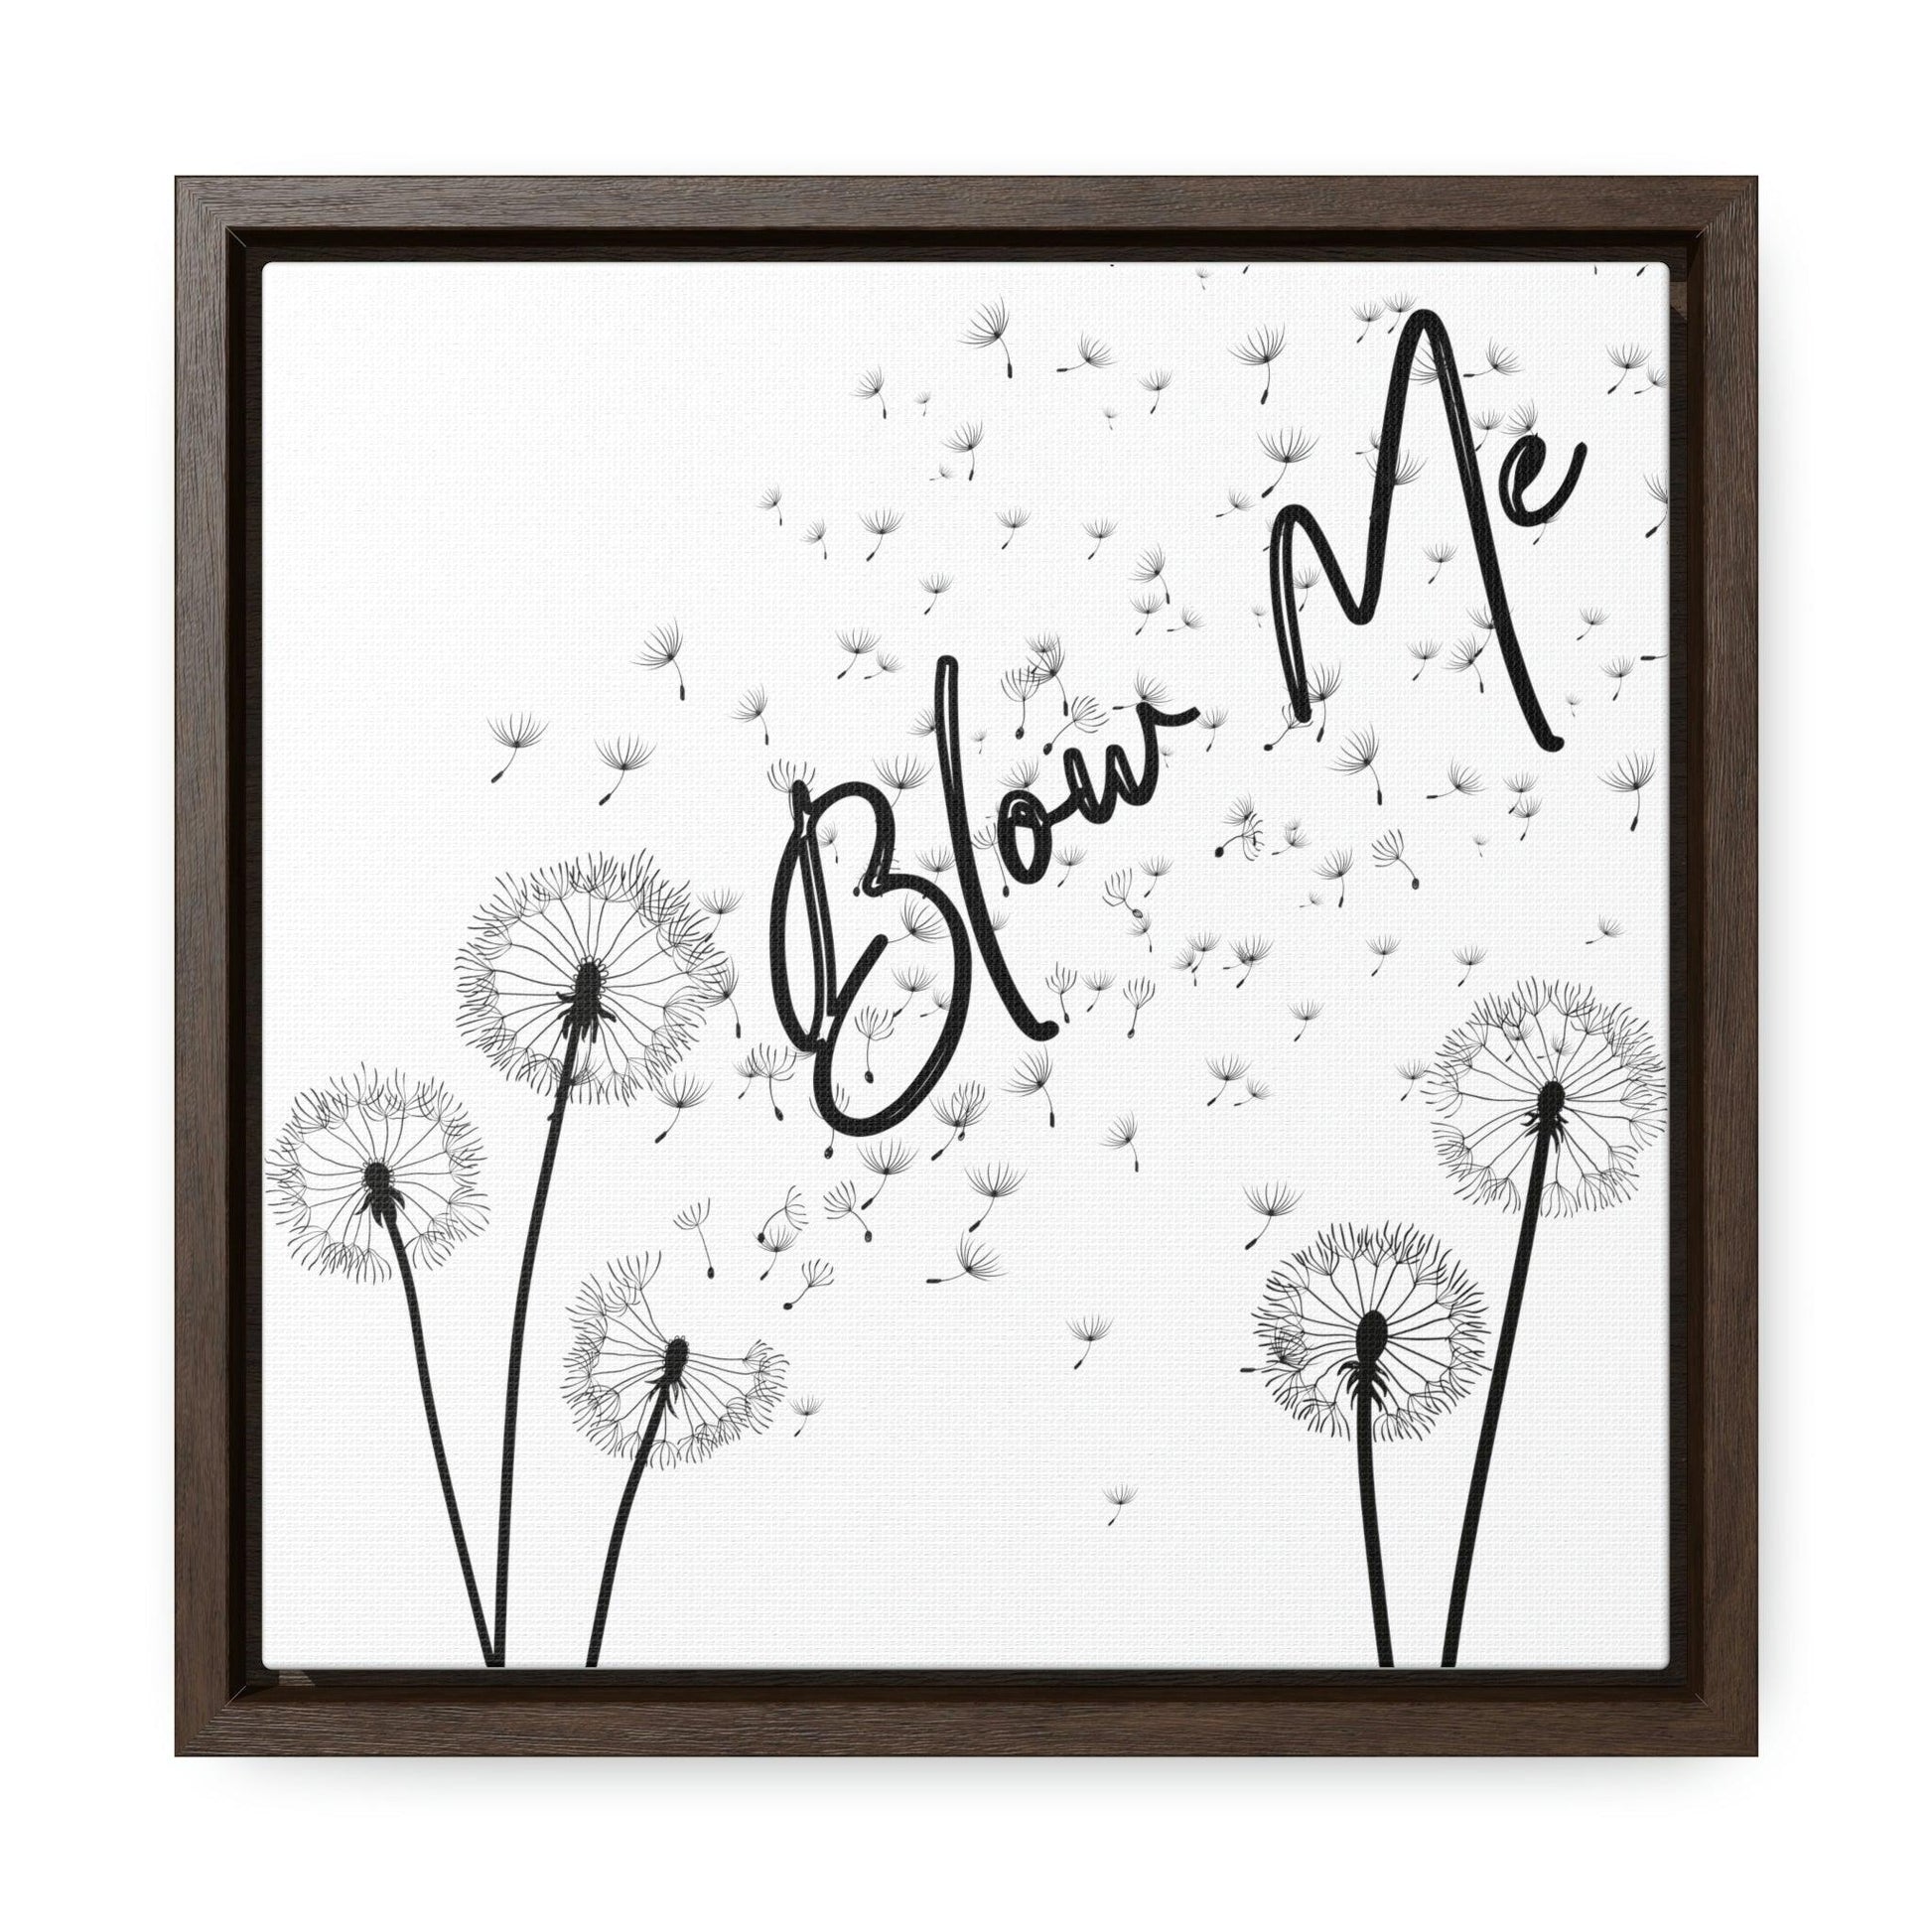 Blow Me - Gallery Canvas Wraps, Square Frame - Moxie Graphics